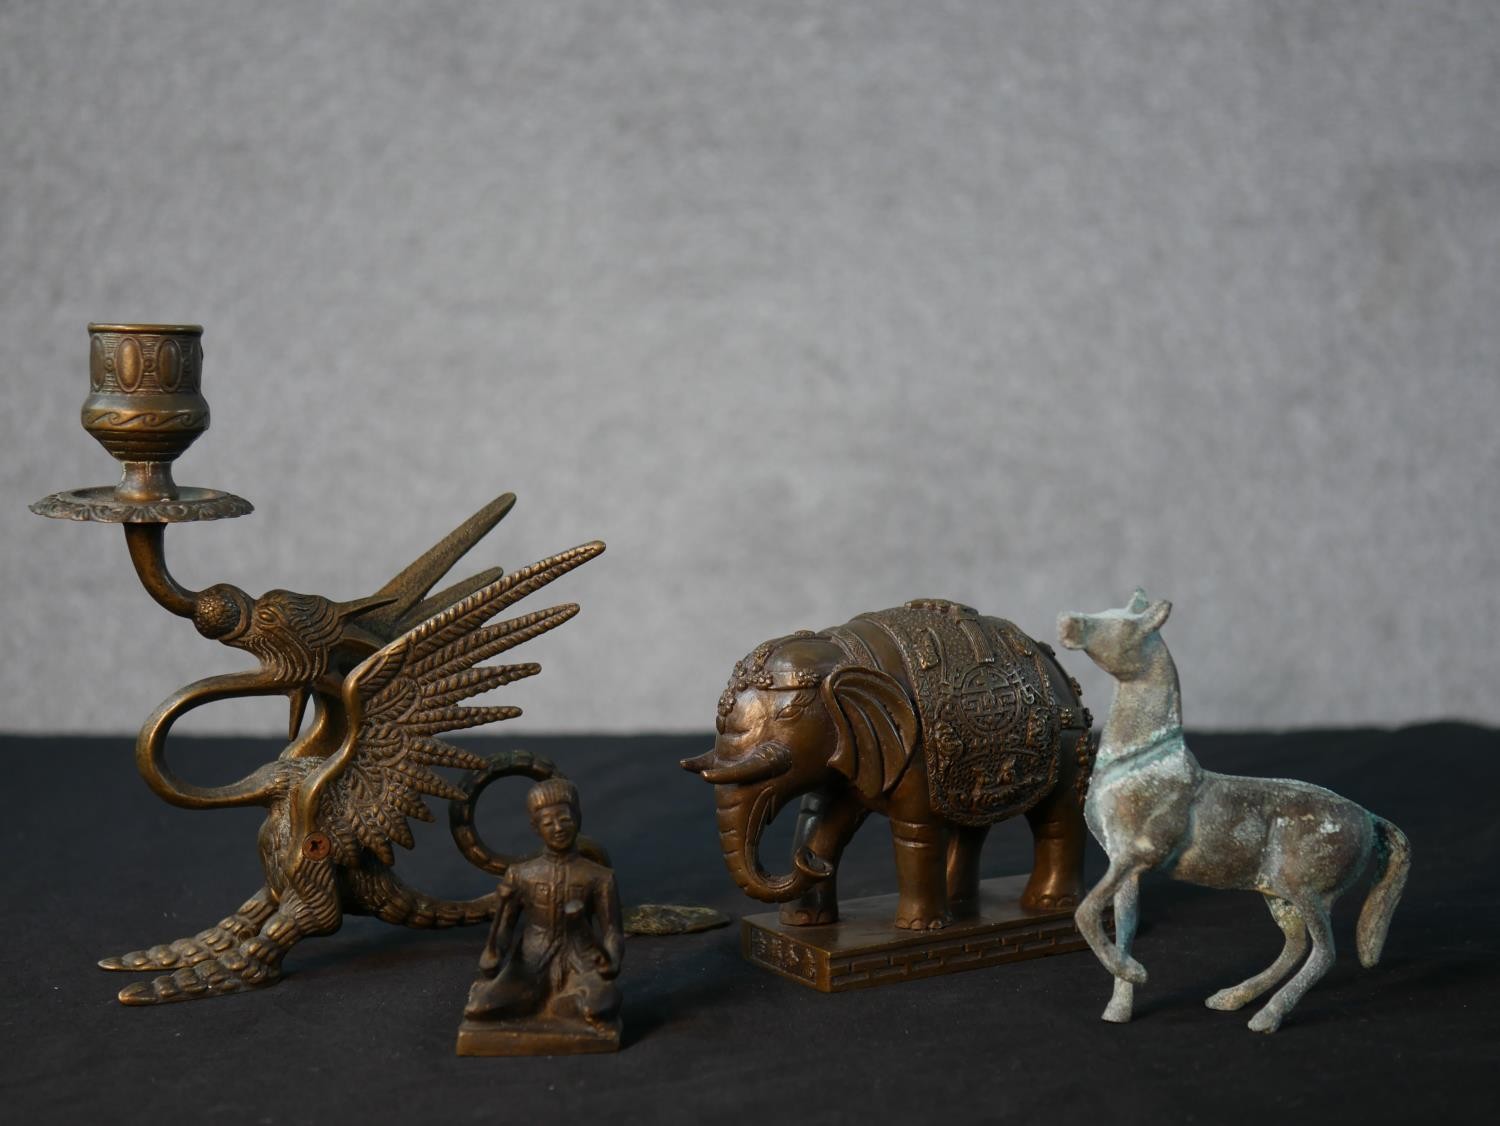 A collection of metalwork figures, including a bronze elephant, a Greek style horse, a Chinese